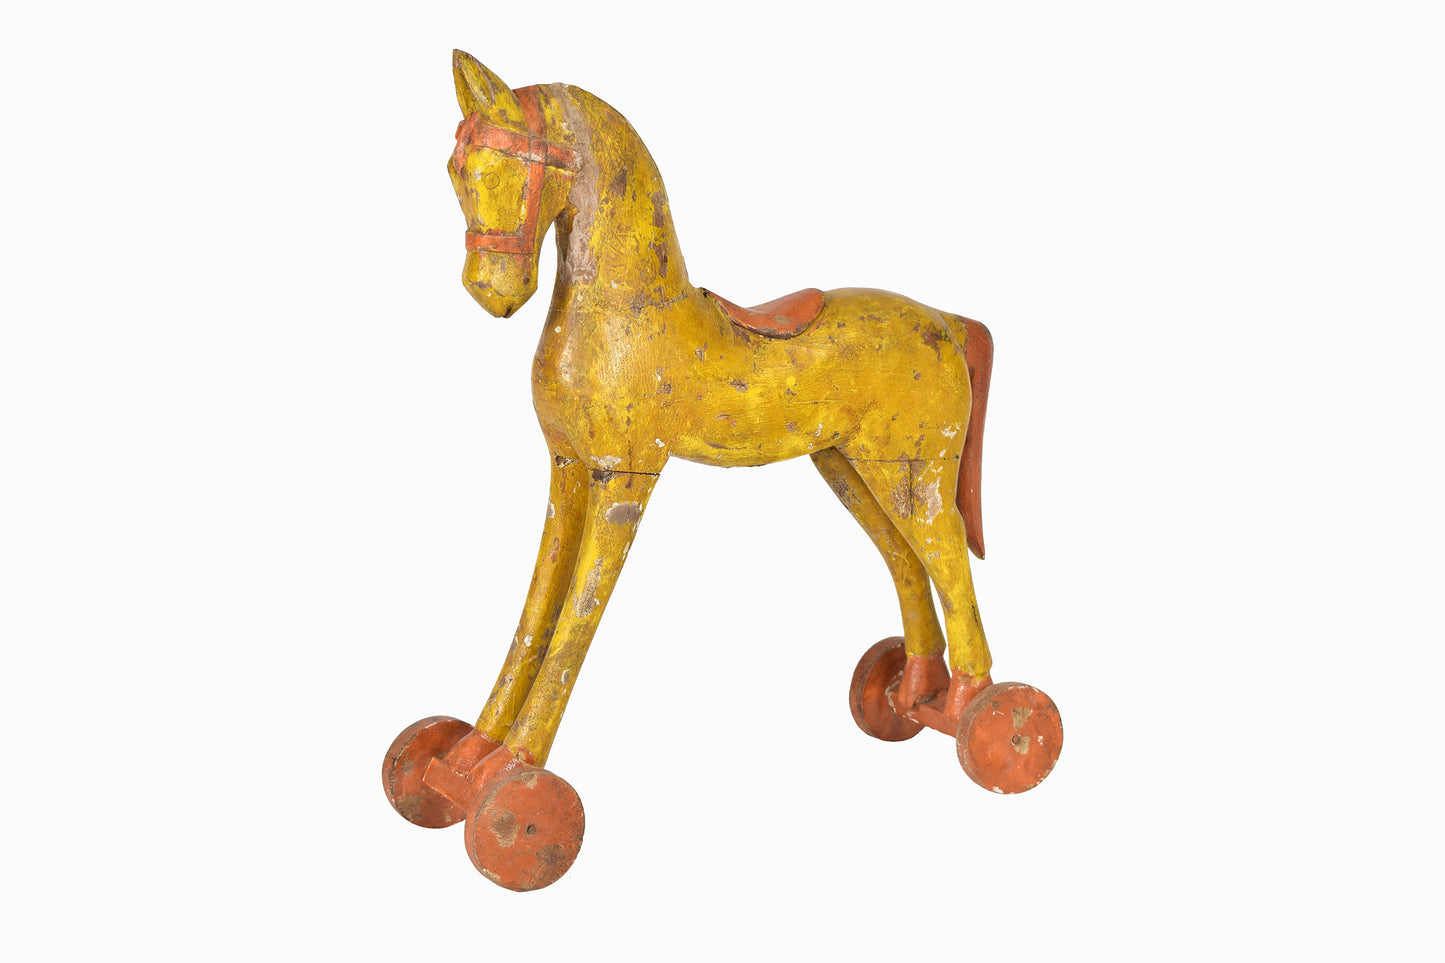 Decorative Yellow Painted Wooden Horse - Large